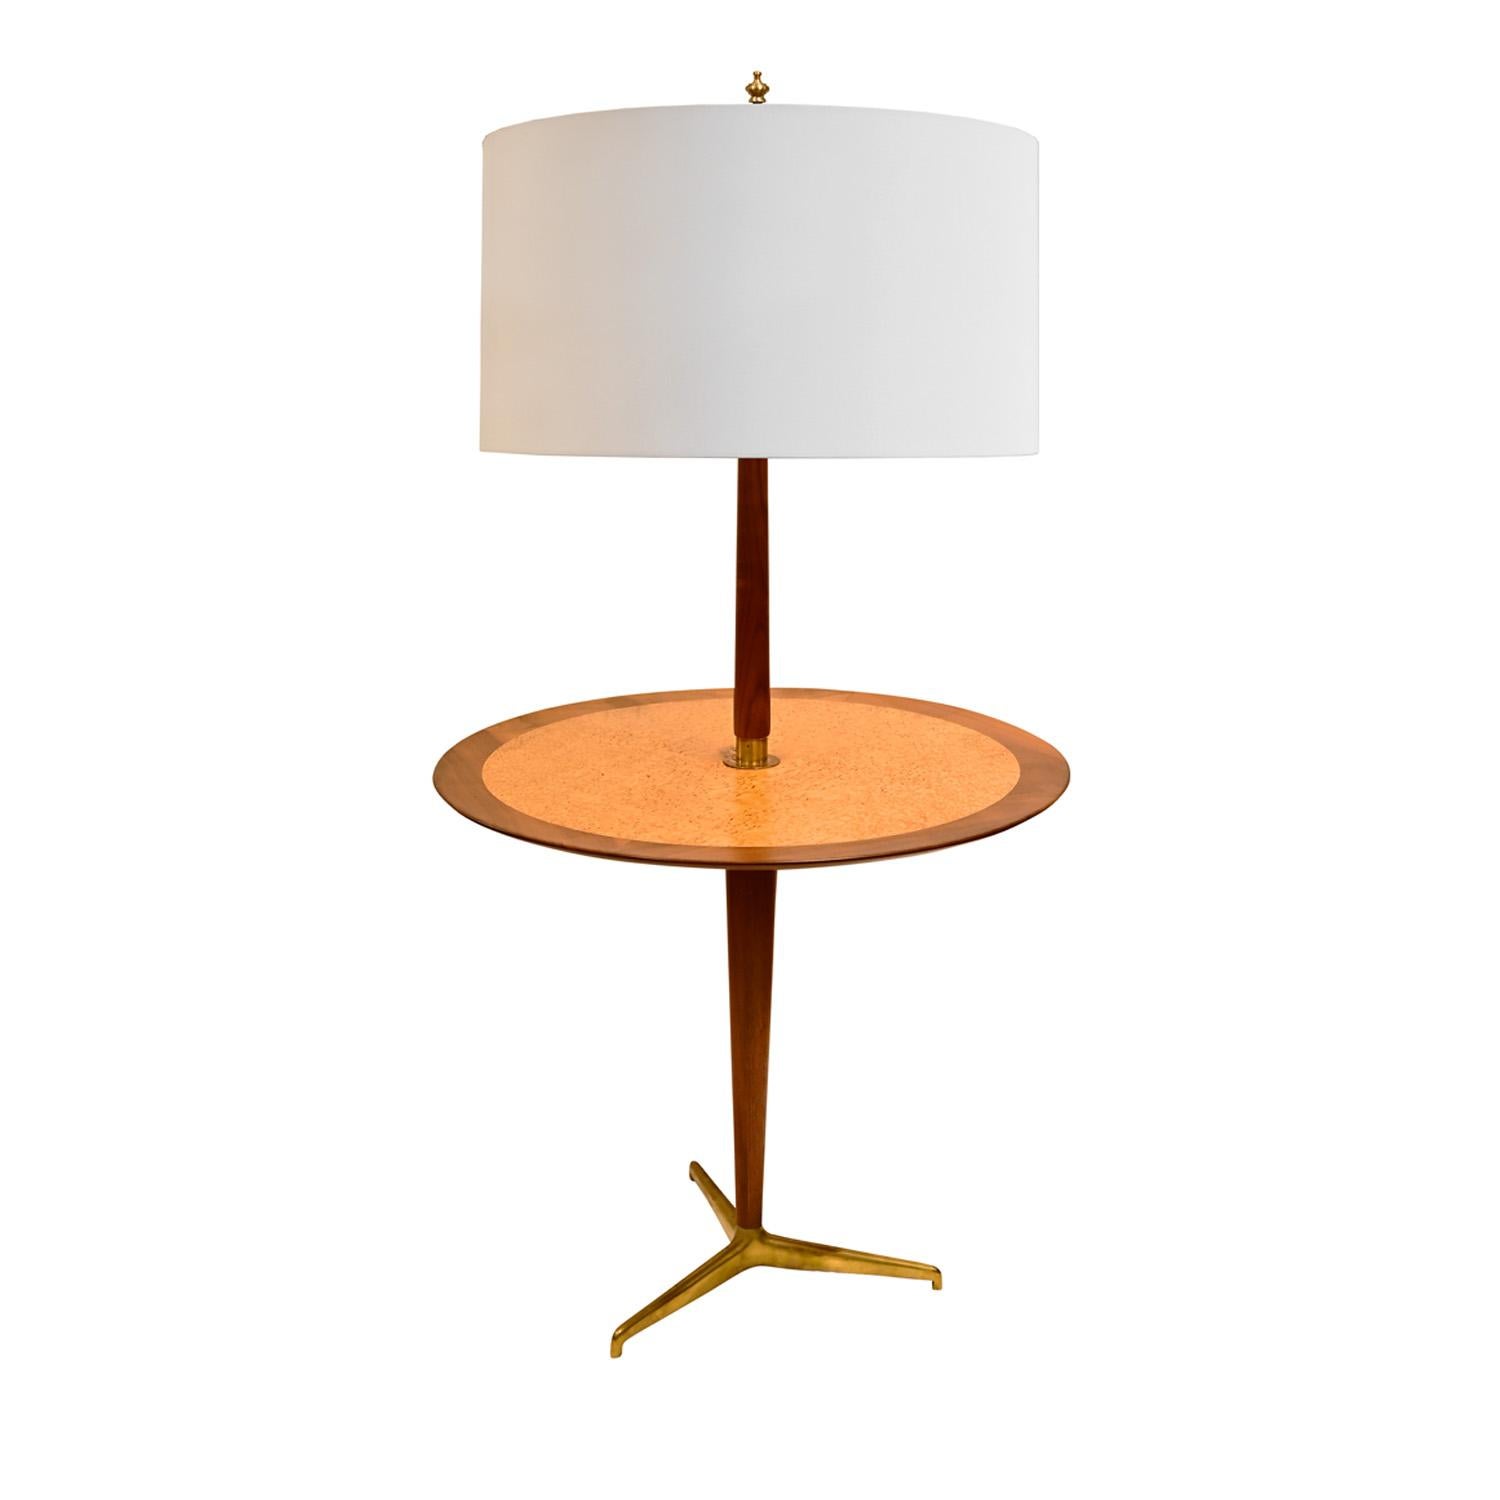 Floor lamp model 5410 with incorporated table in walnut with book-matched Carpathian elm and solid brass base by Edward Wormley for Dunbar, 1954 (signed “Dunbar Berne Indiana” on label on bottom).  This iconic floor lamp is beautifully made in fine